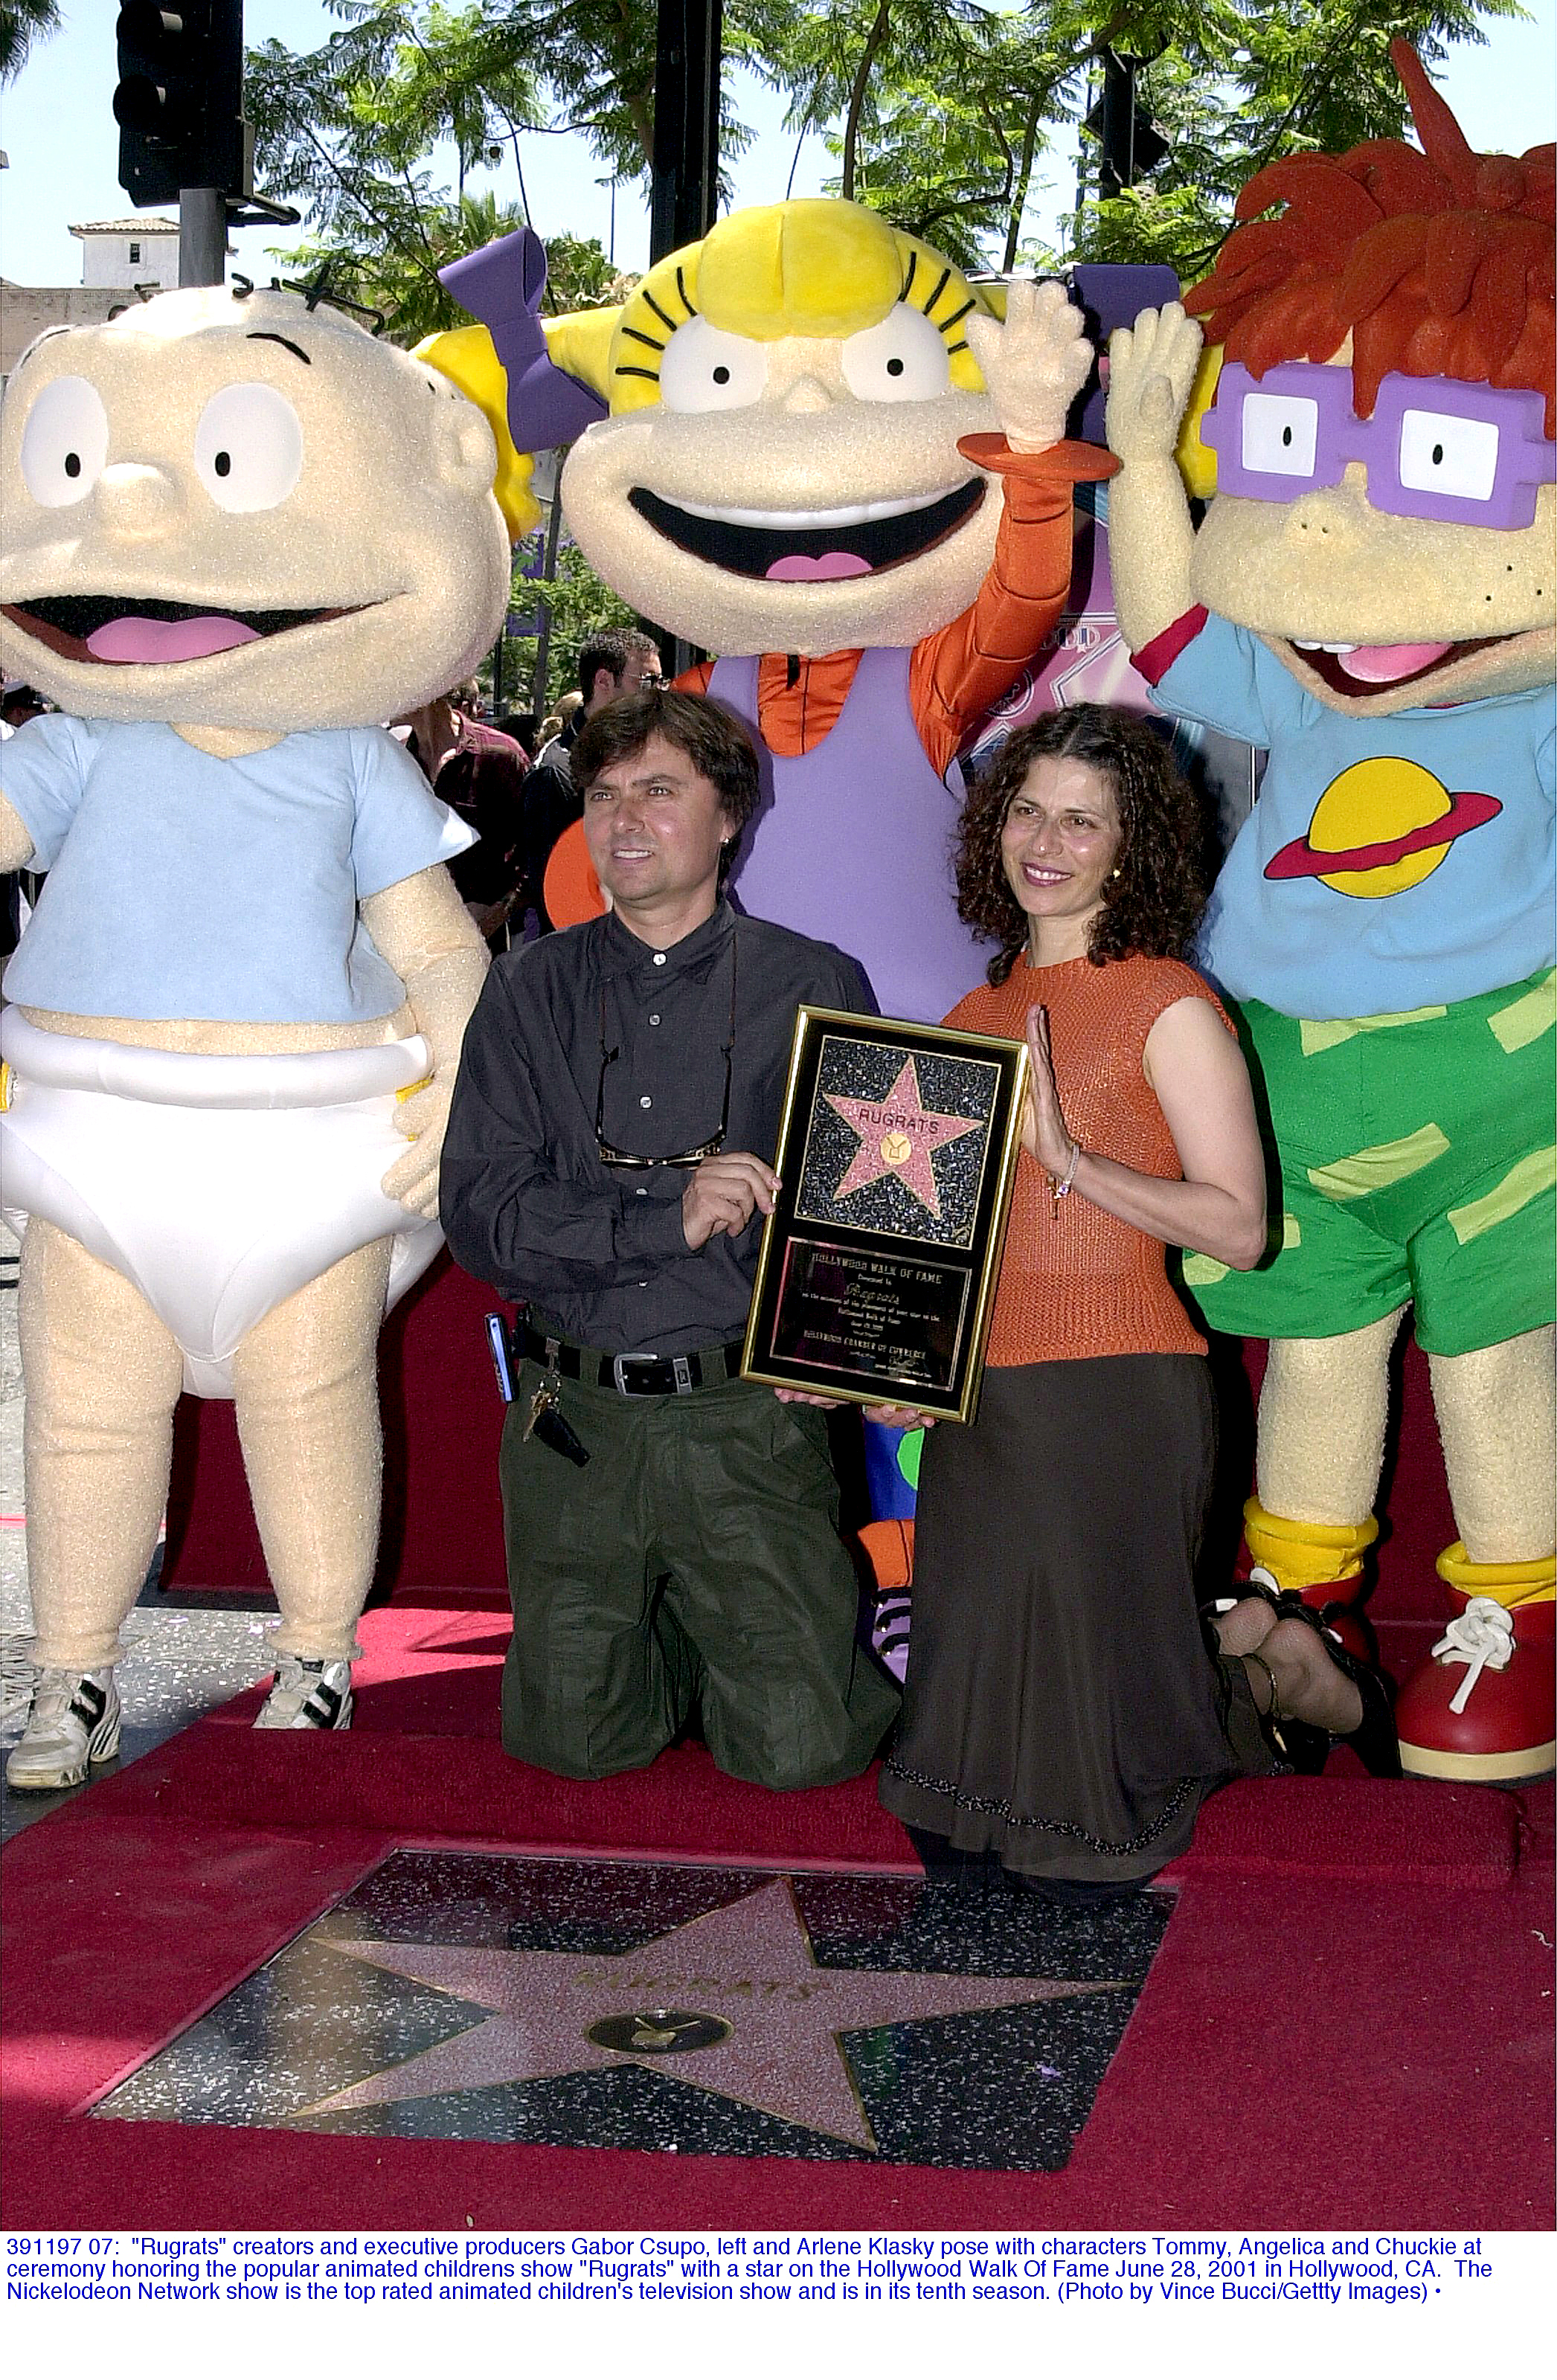 Gabor Csupo with Arlene Klasky with the Rugrats Star on the Hollywood Walk Of Fame, Hollywwod Blvd.